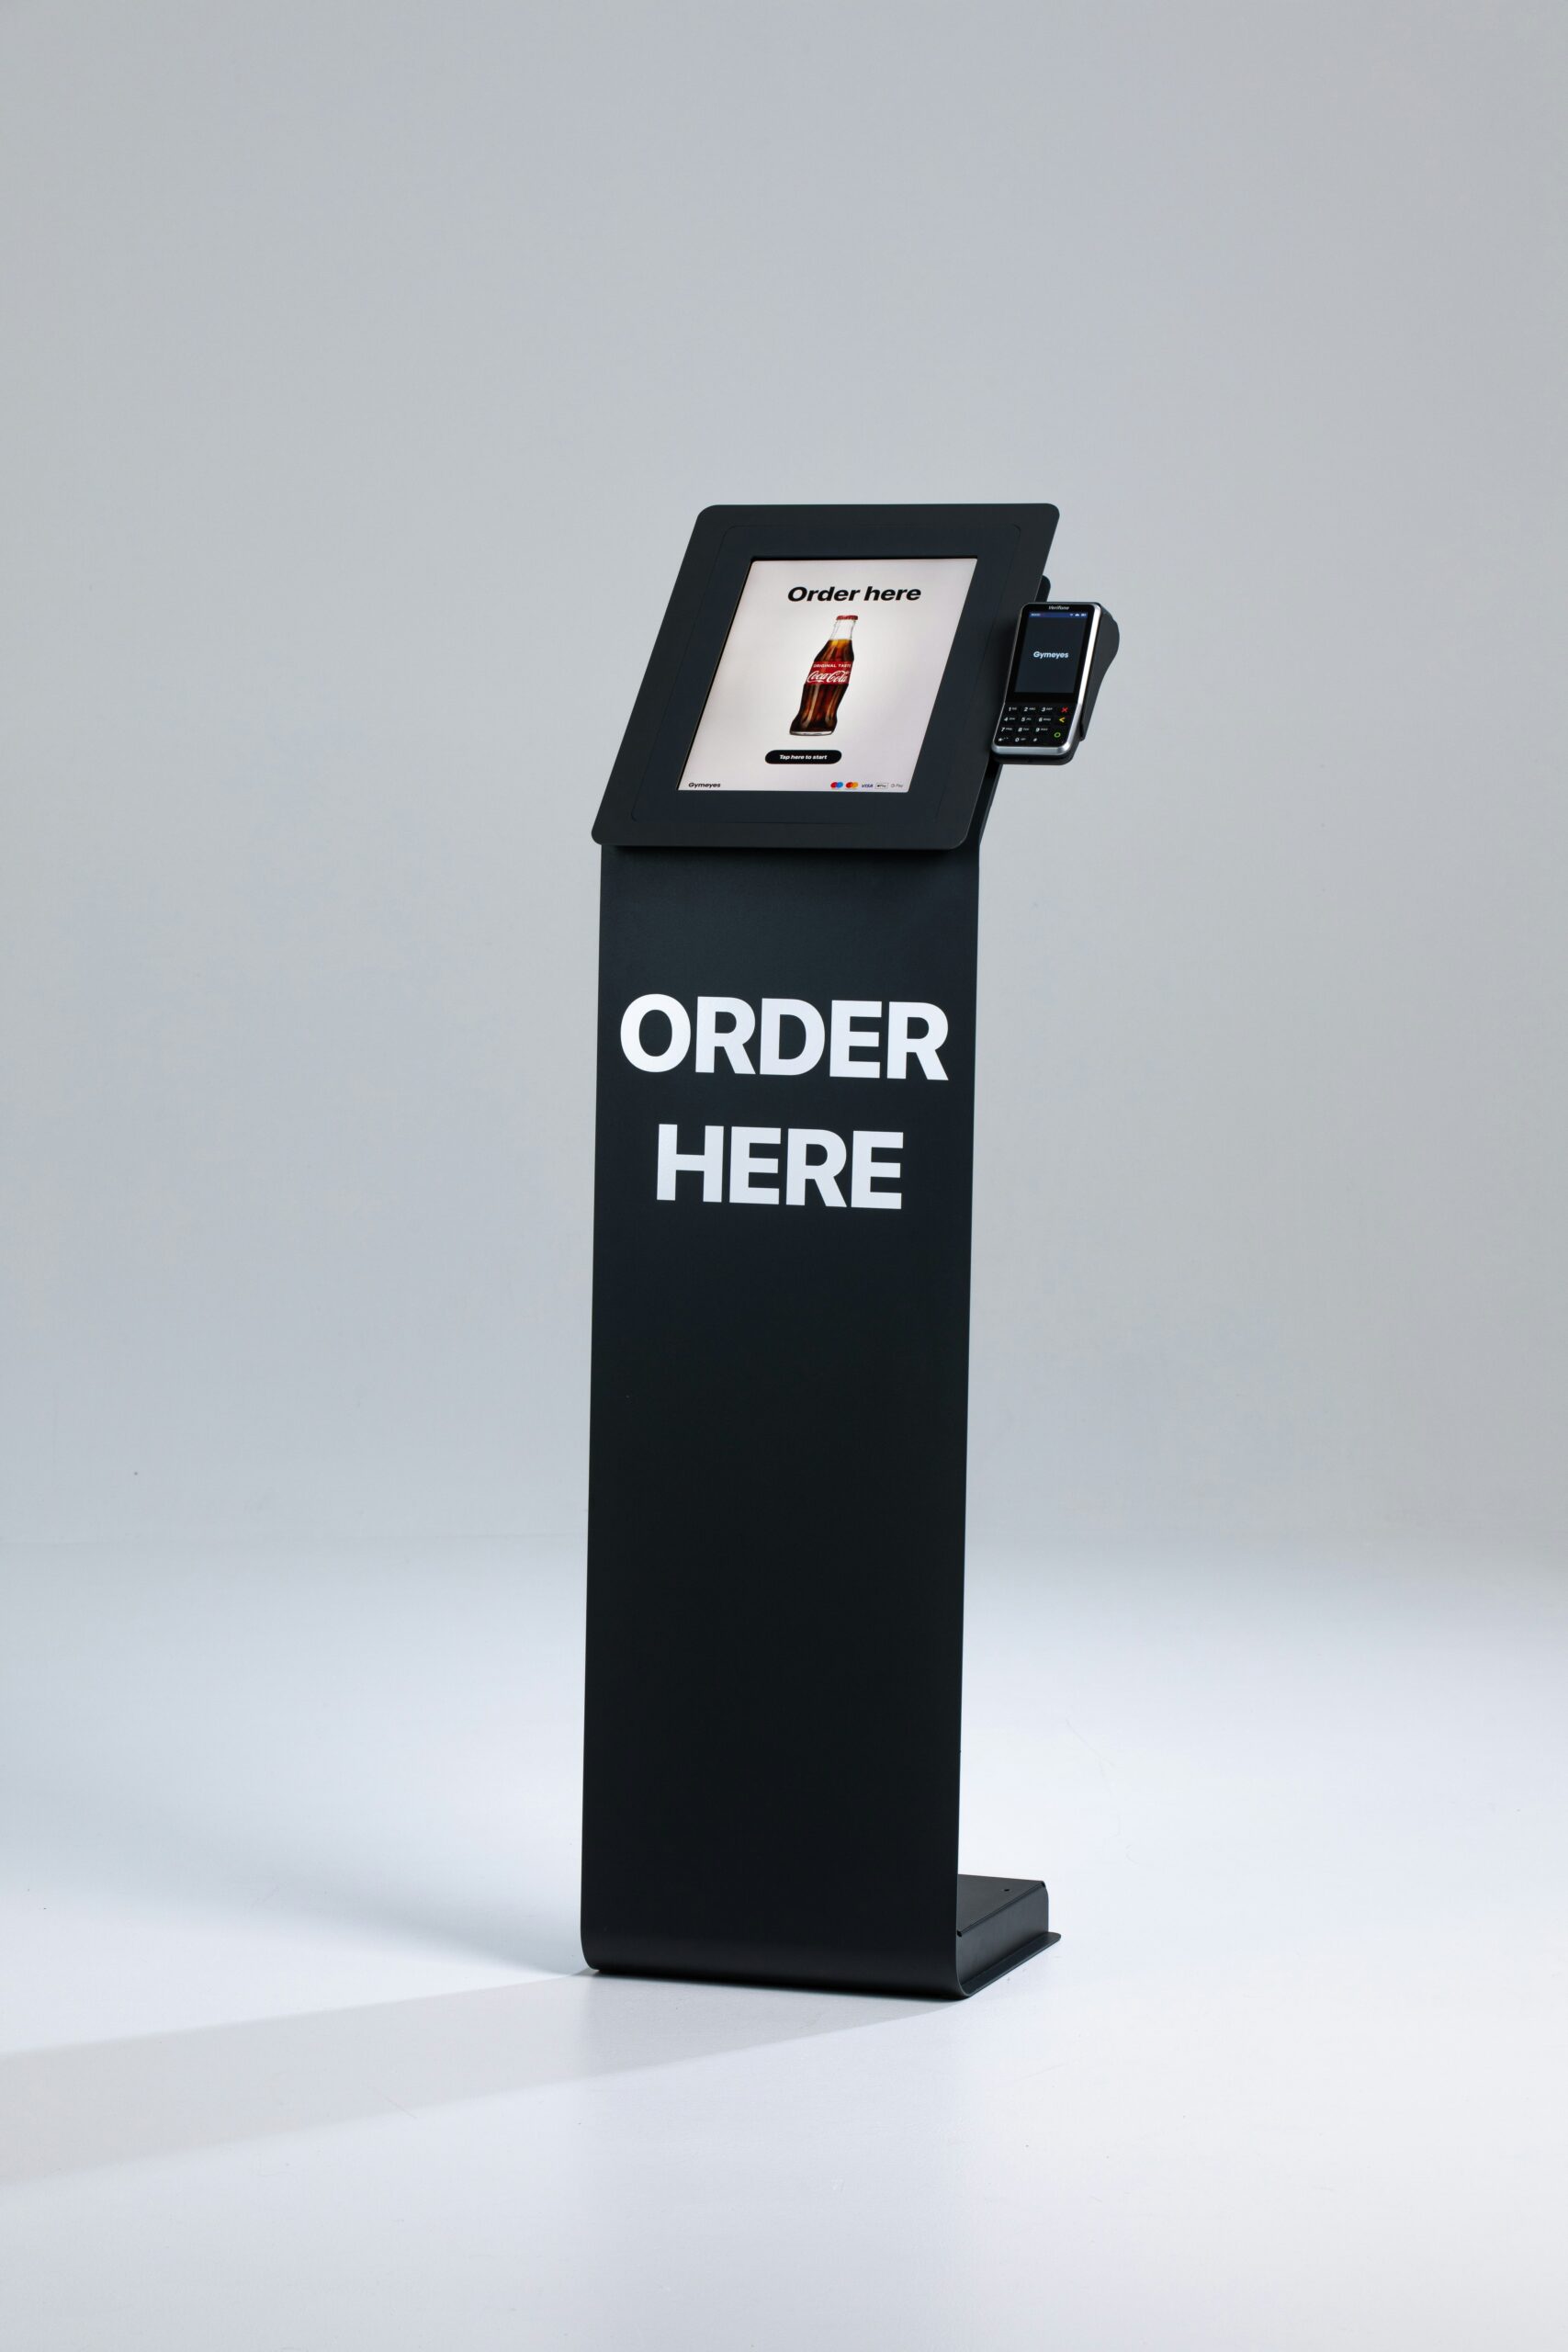 a self-service order and pay kiosk